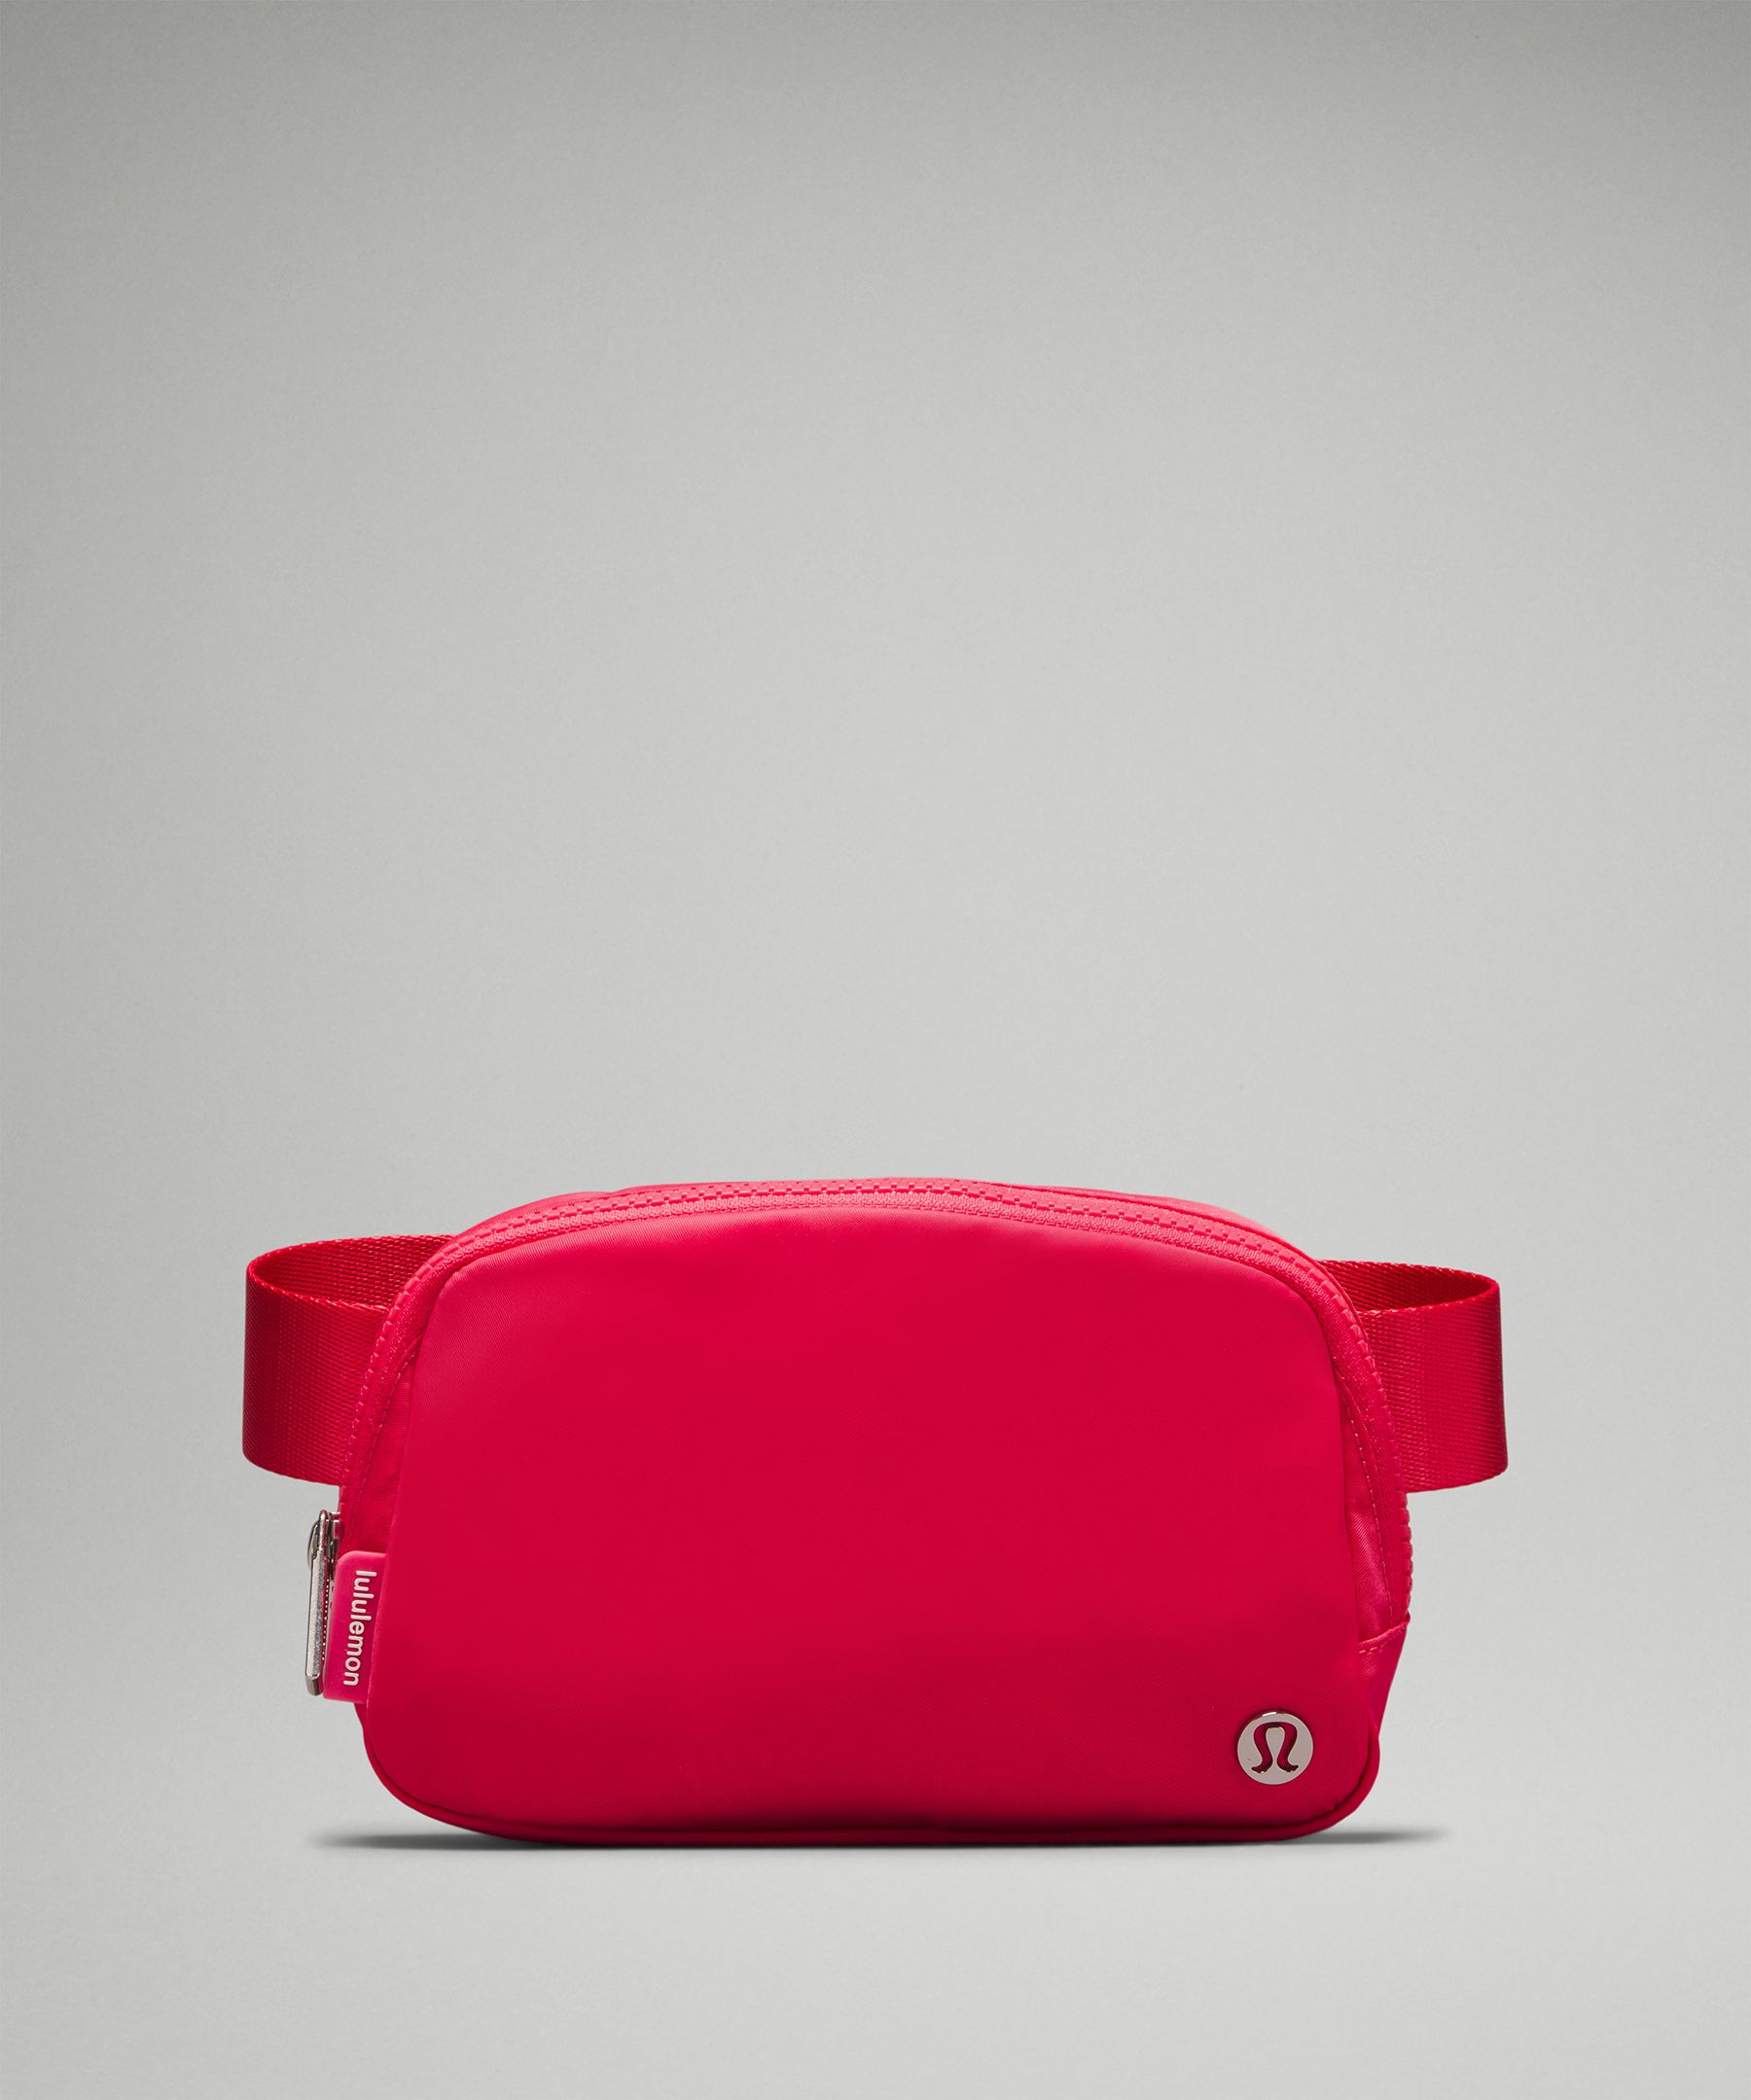 This Best-Selling Belt Bag Is Only $23 on